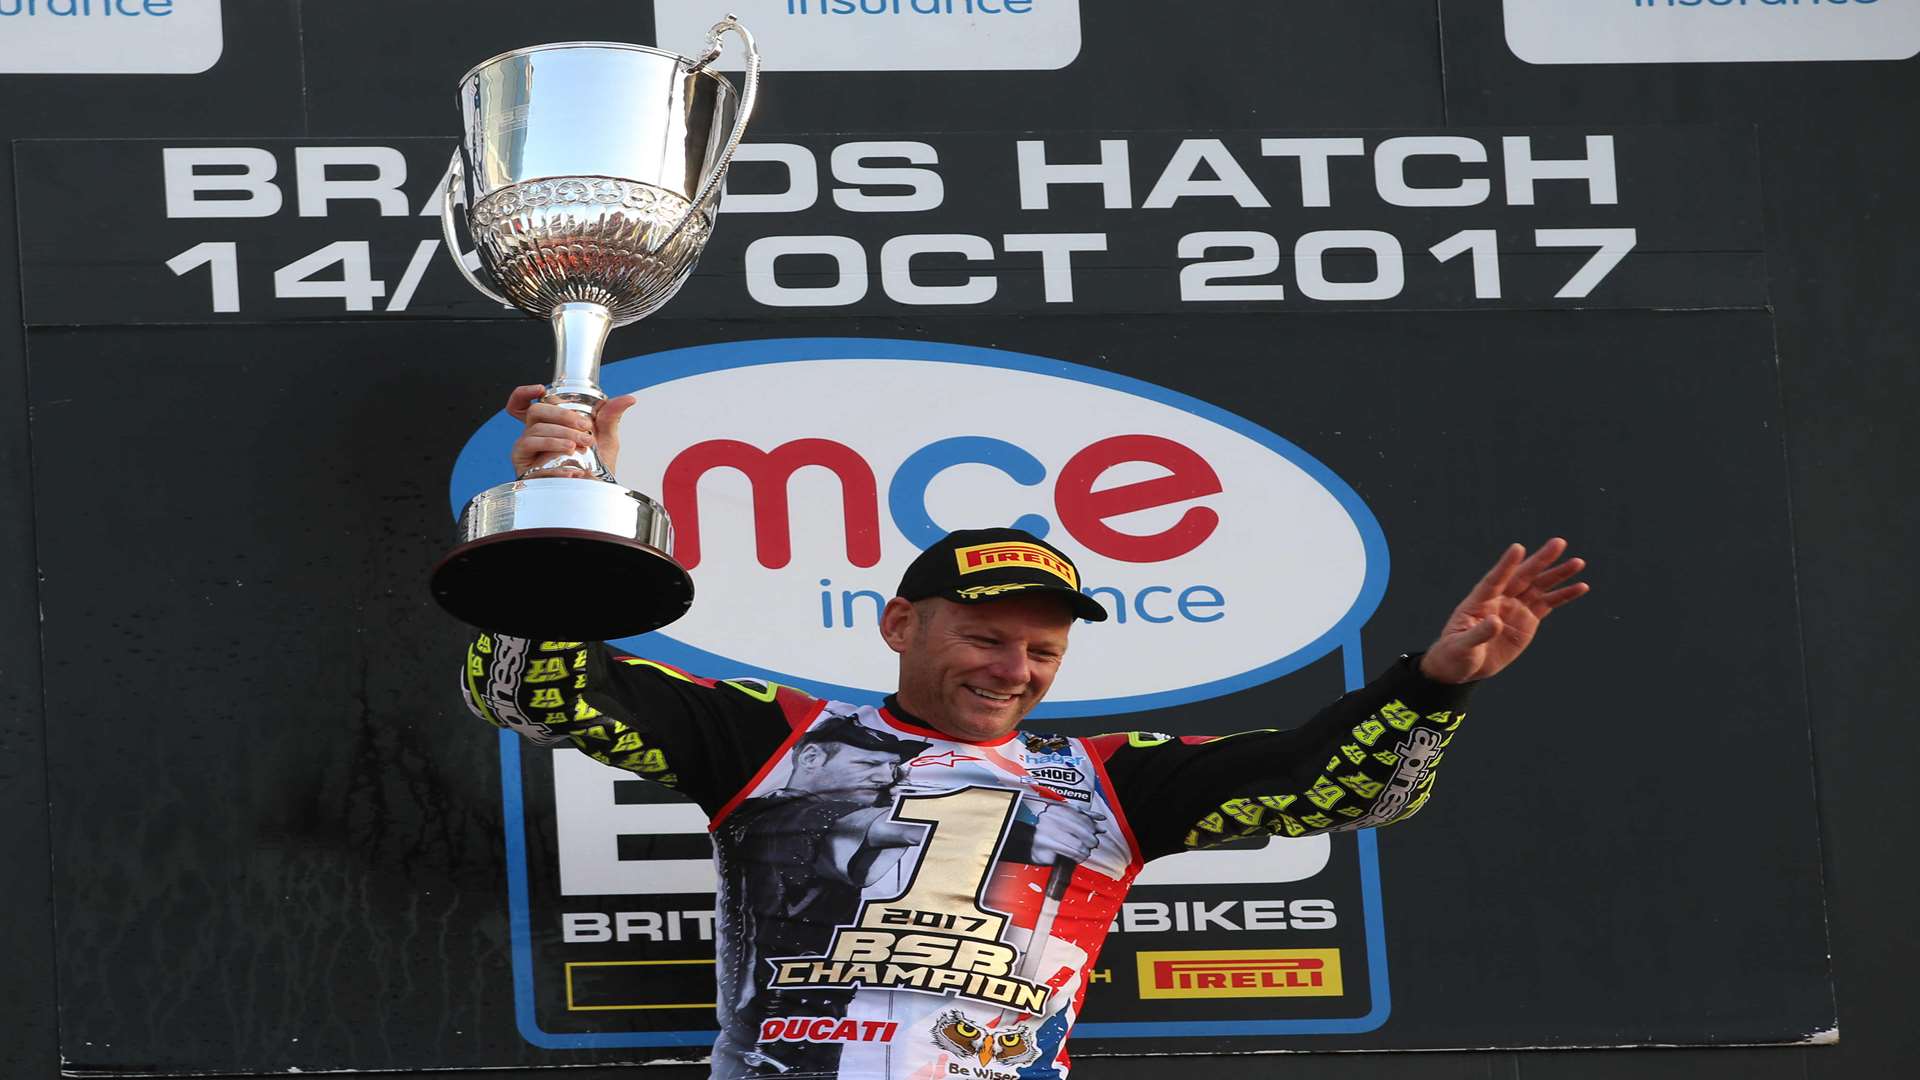 Shane Byrne wins the British Superbike title for the sixth time Picture: Bonnie Lane